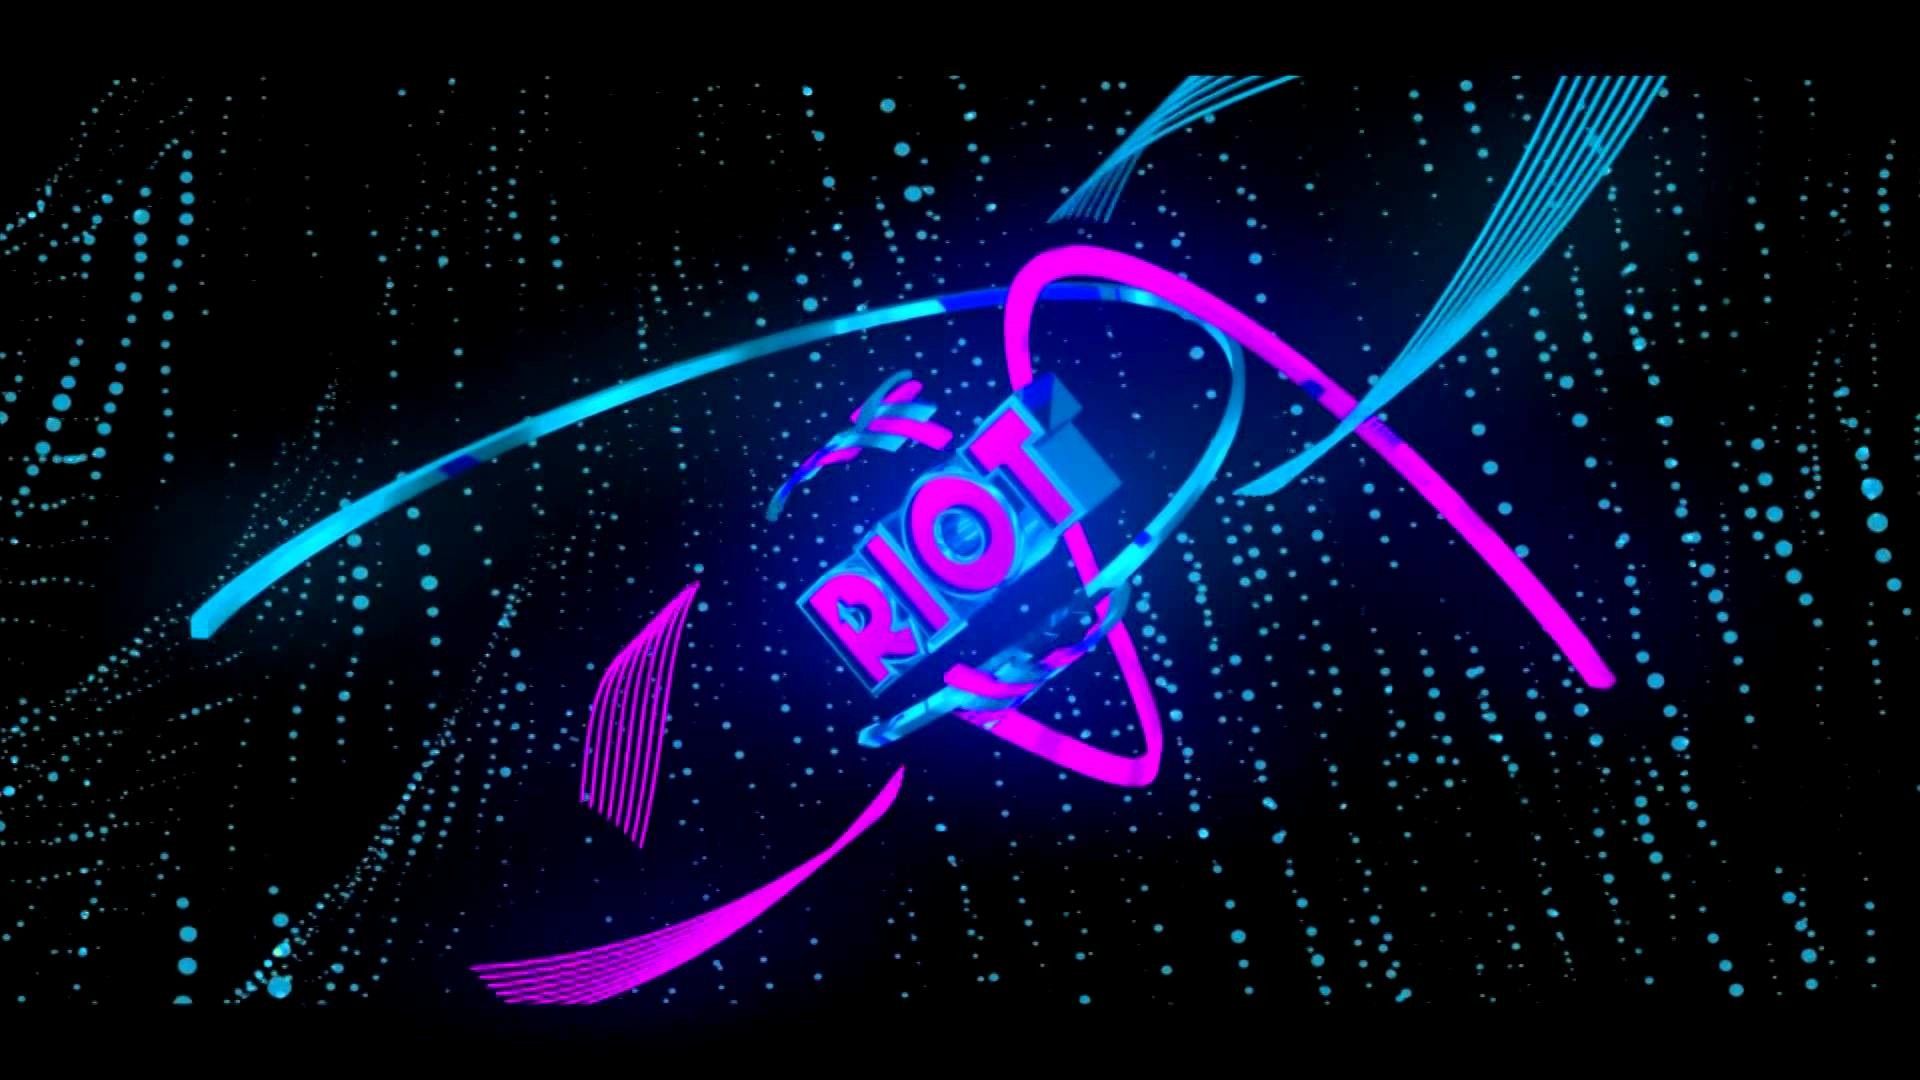 geometry dash backgrounds